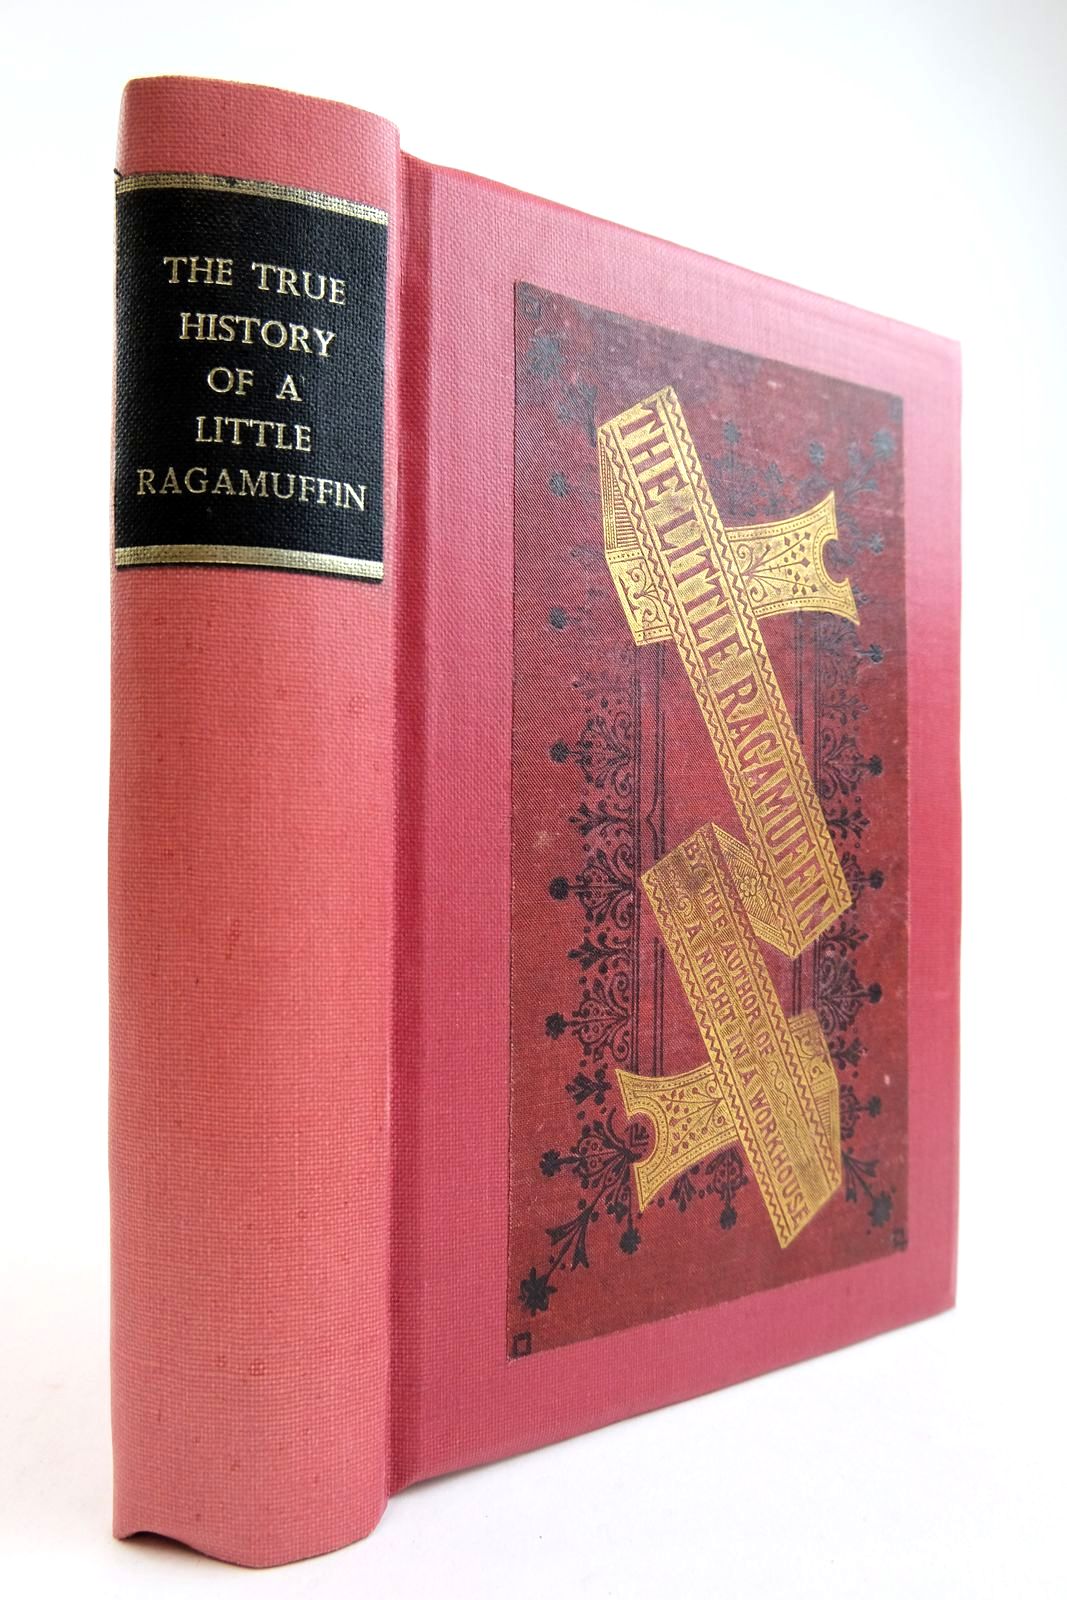 Photo of THE TRUE HISTORY OF A LITTLE RAGAMUFFIN written by Greenwood, James illustrated by Phiz, Thomson, J. Gordon published by Ward, Lock And Tyler (STOCK CODE: 2134028)  for sale by Stella & Rose's Books